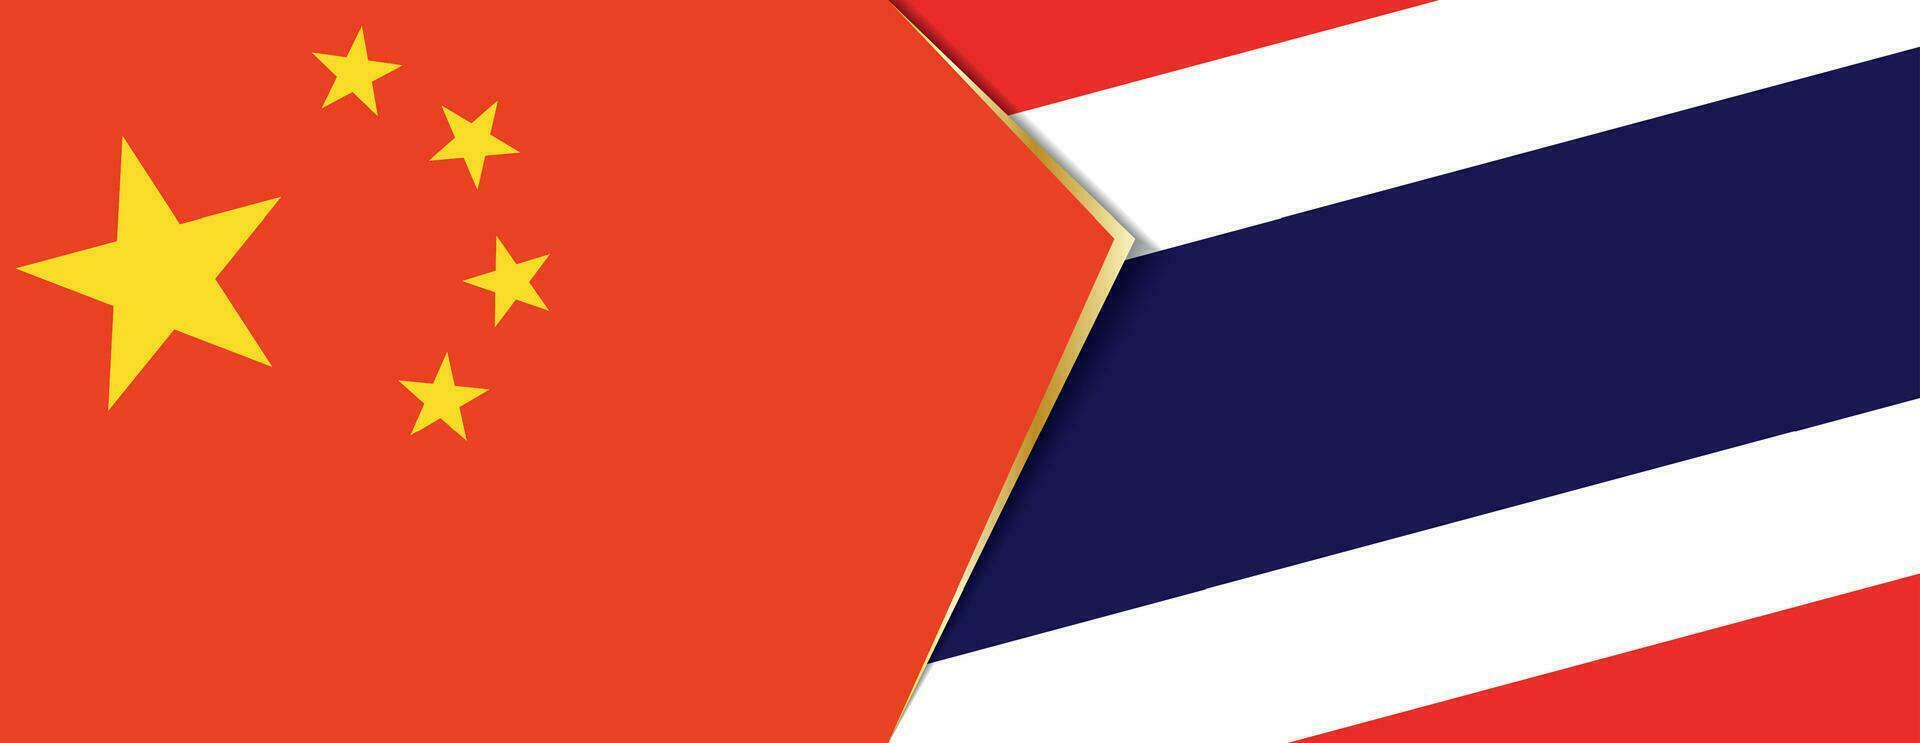 China and Thailand flags, two vector flags.